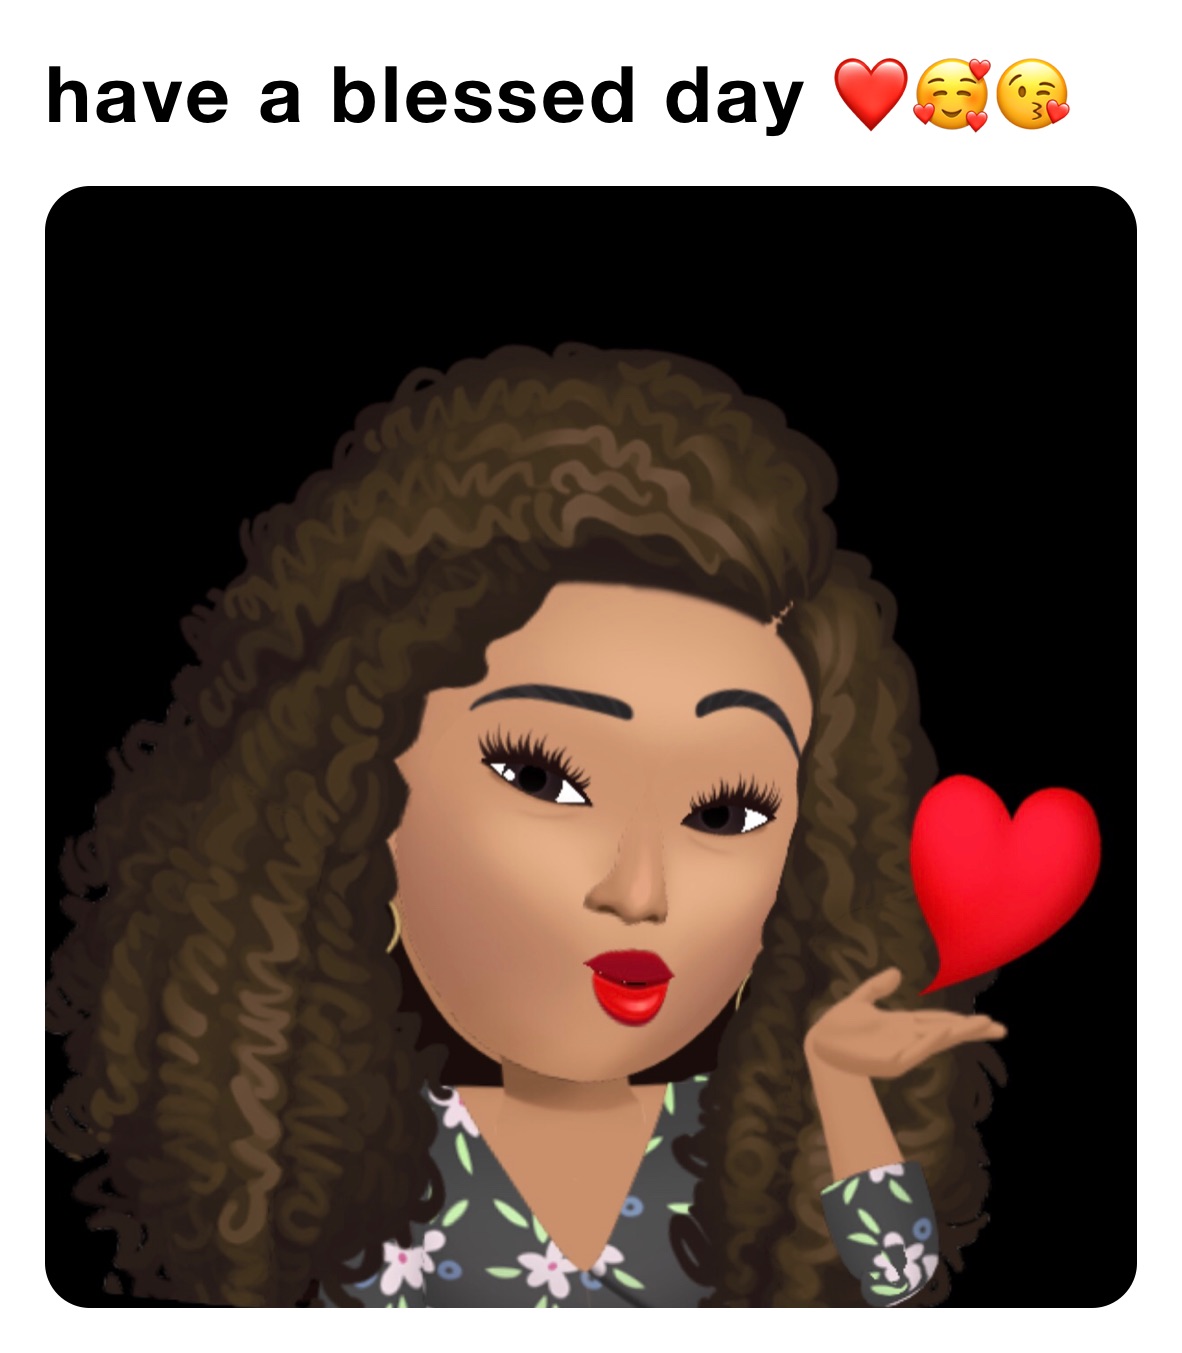 have a blessed day ❤️🥰😘